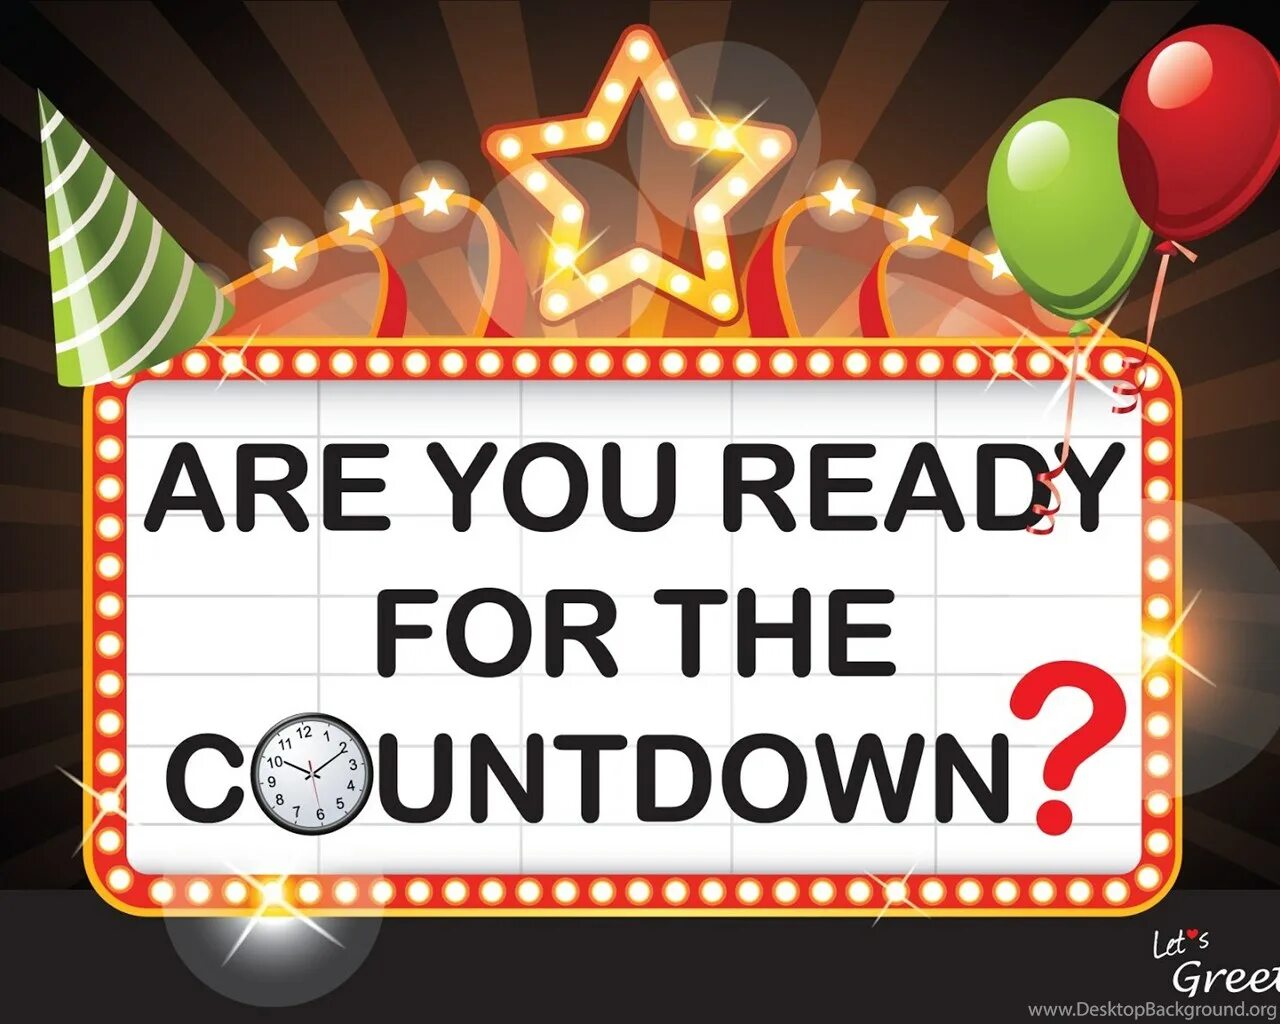 Countdown to New year. Are you ready. Ready for the New year. New year Countdown book. See you ready